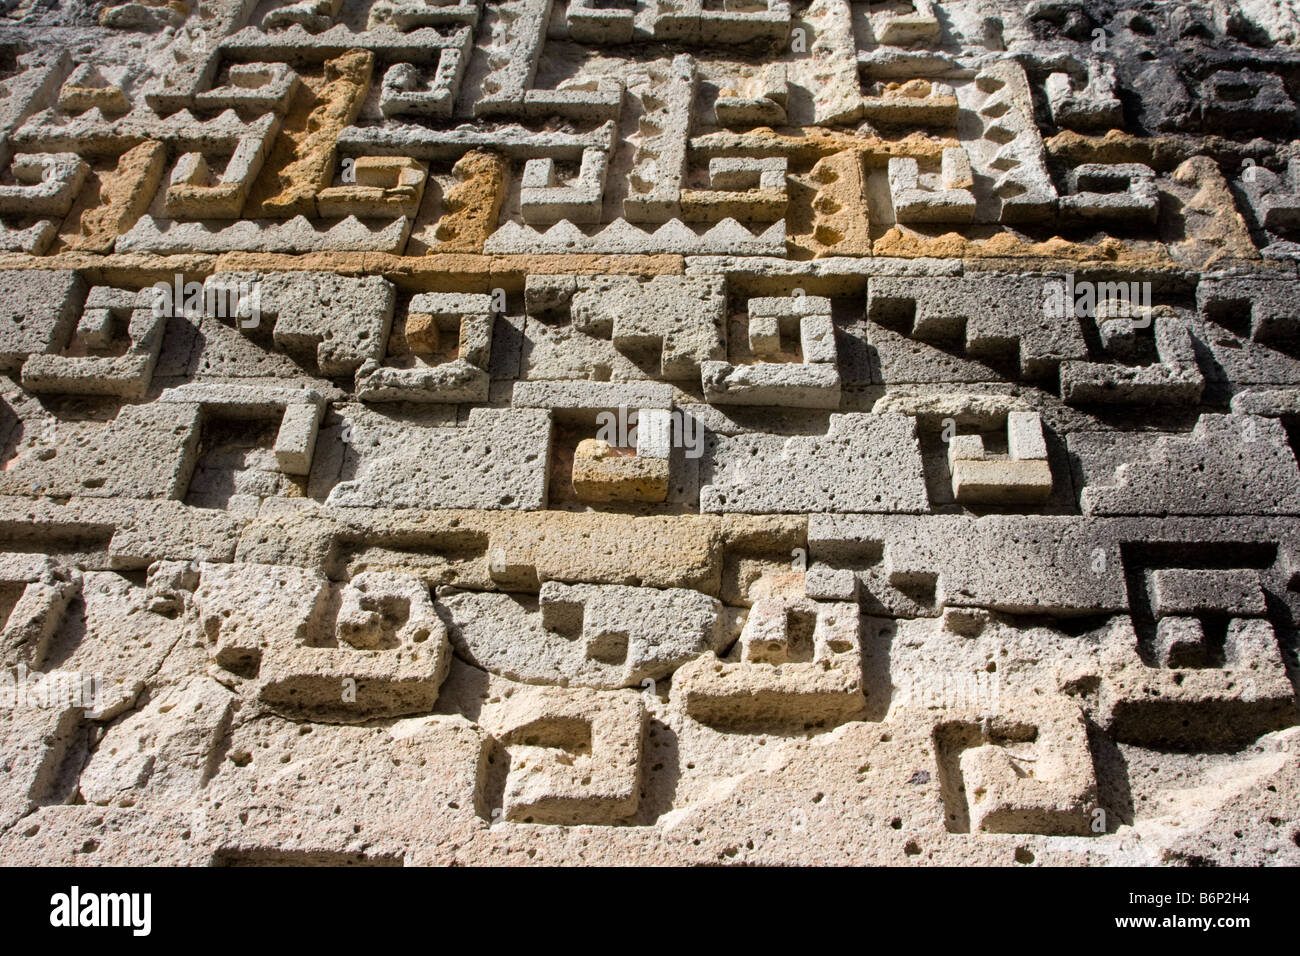 Mitla, Oaxaca, Mexico. Zapotec Geometric Designs and Symbols Decorate the Construction of the Palace and the Courtyards. Stock Photo